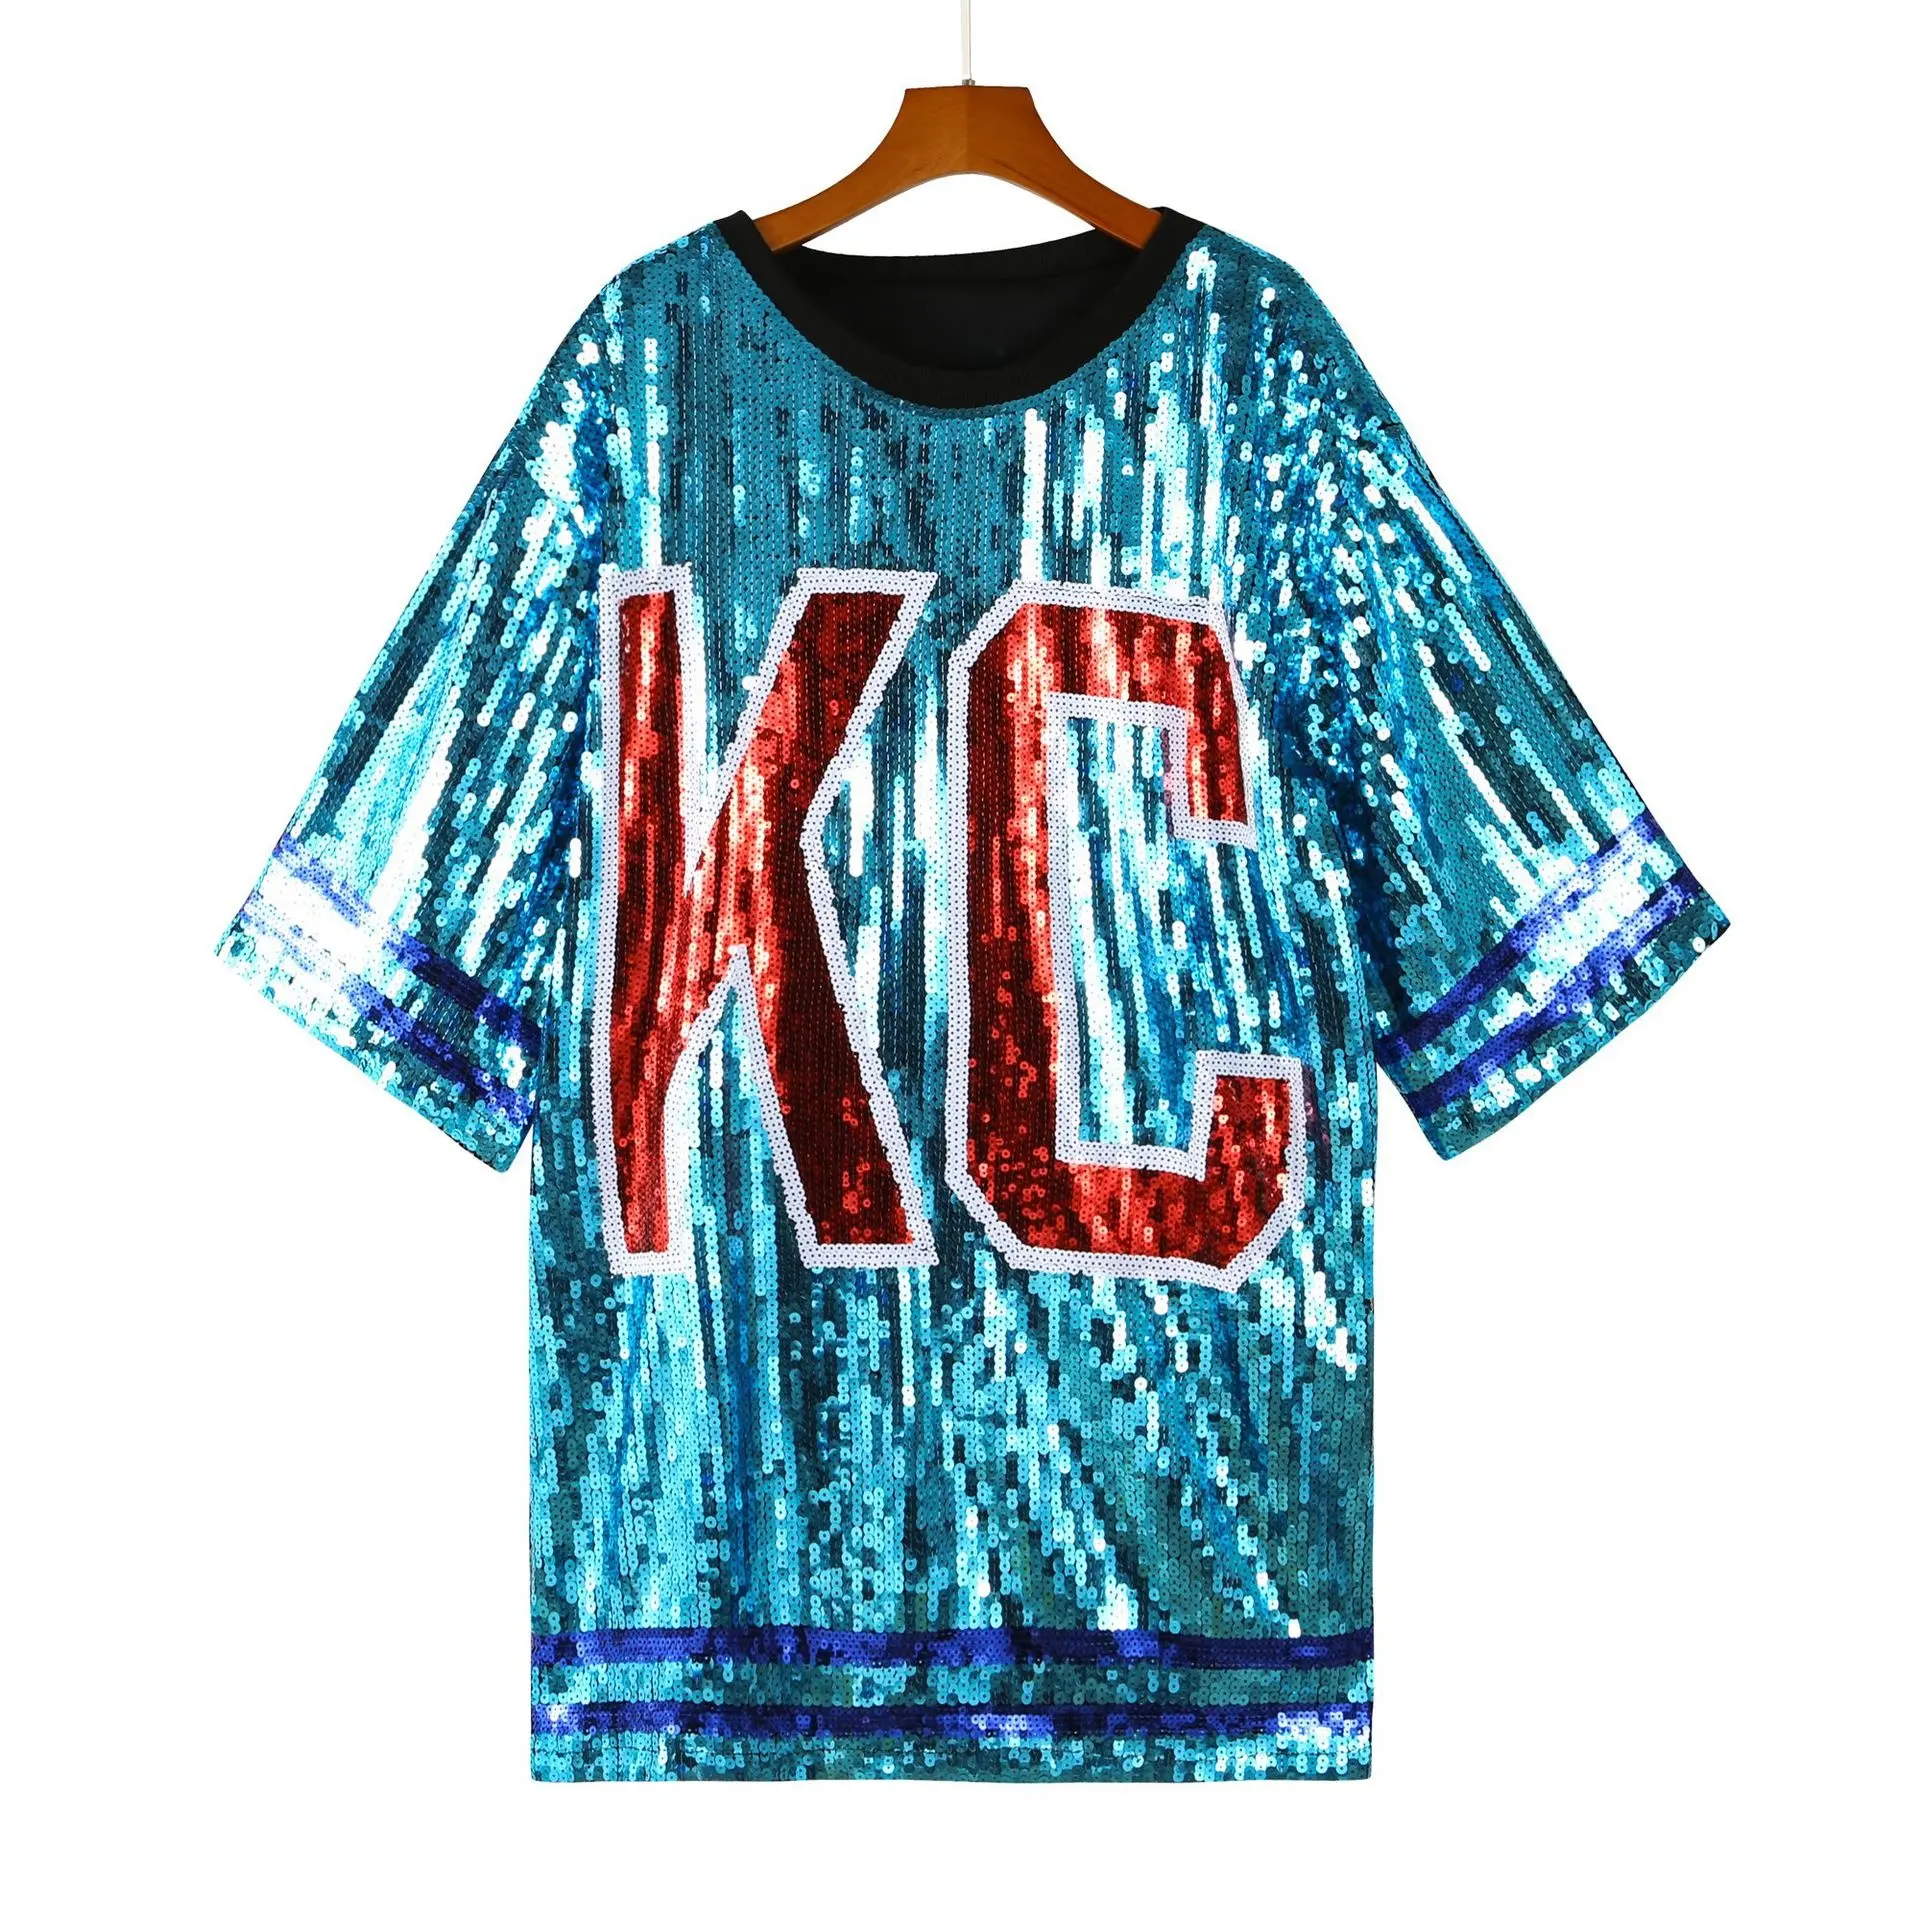 Quality spot sequin shirt large size medium-length beaded embroidery letters KC sequin T-shirt